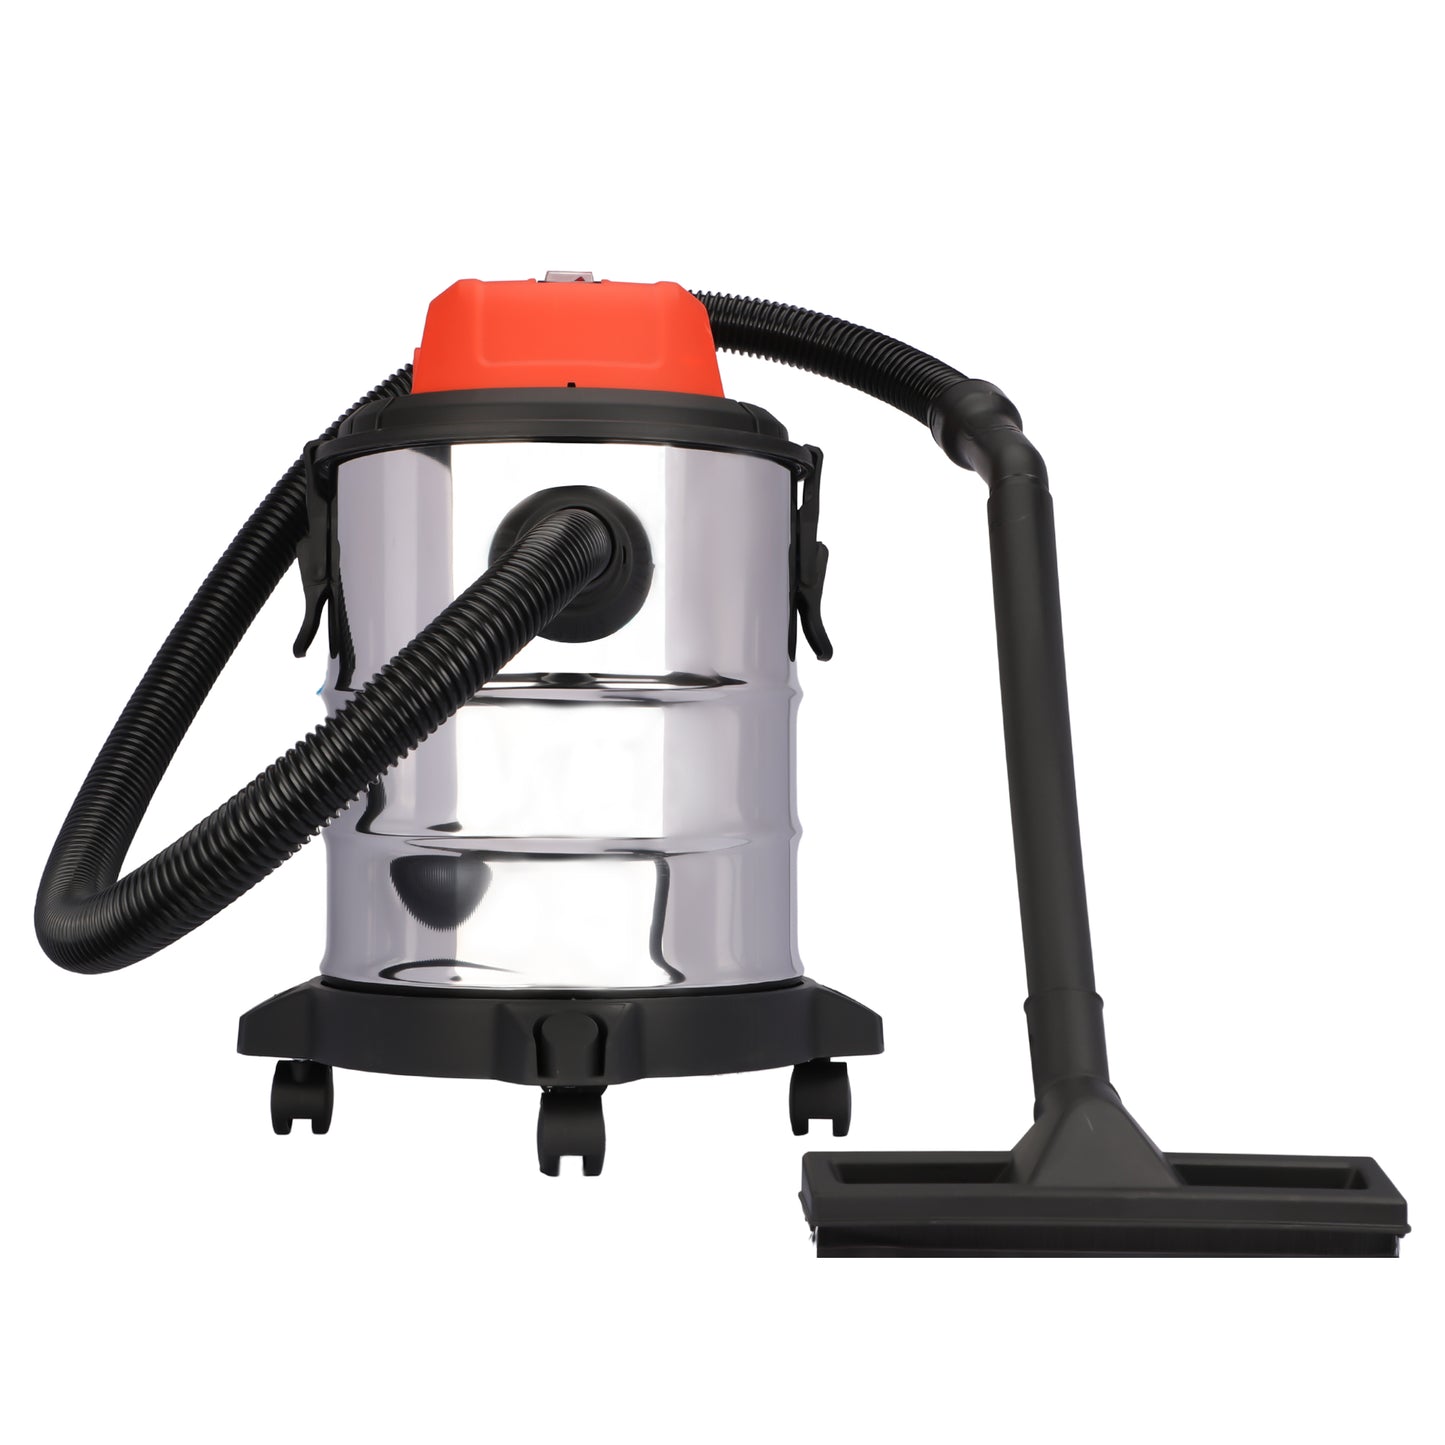 STARQ Wet and Dry Vacuum Cleaner for Home| 1000 Watt & 17 Kpa Suction |3in1 Multifunction Wet/Dry/Blowing|Break Resistant Tank| 1.5 MTR Hose (30 LTR)